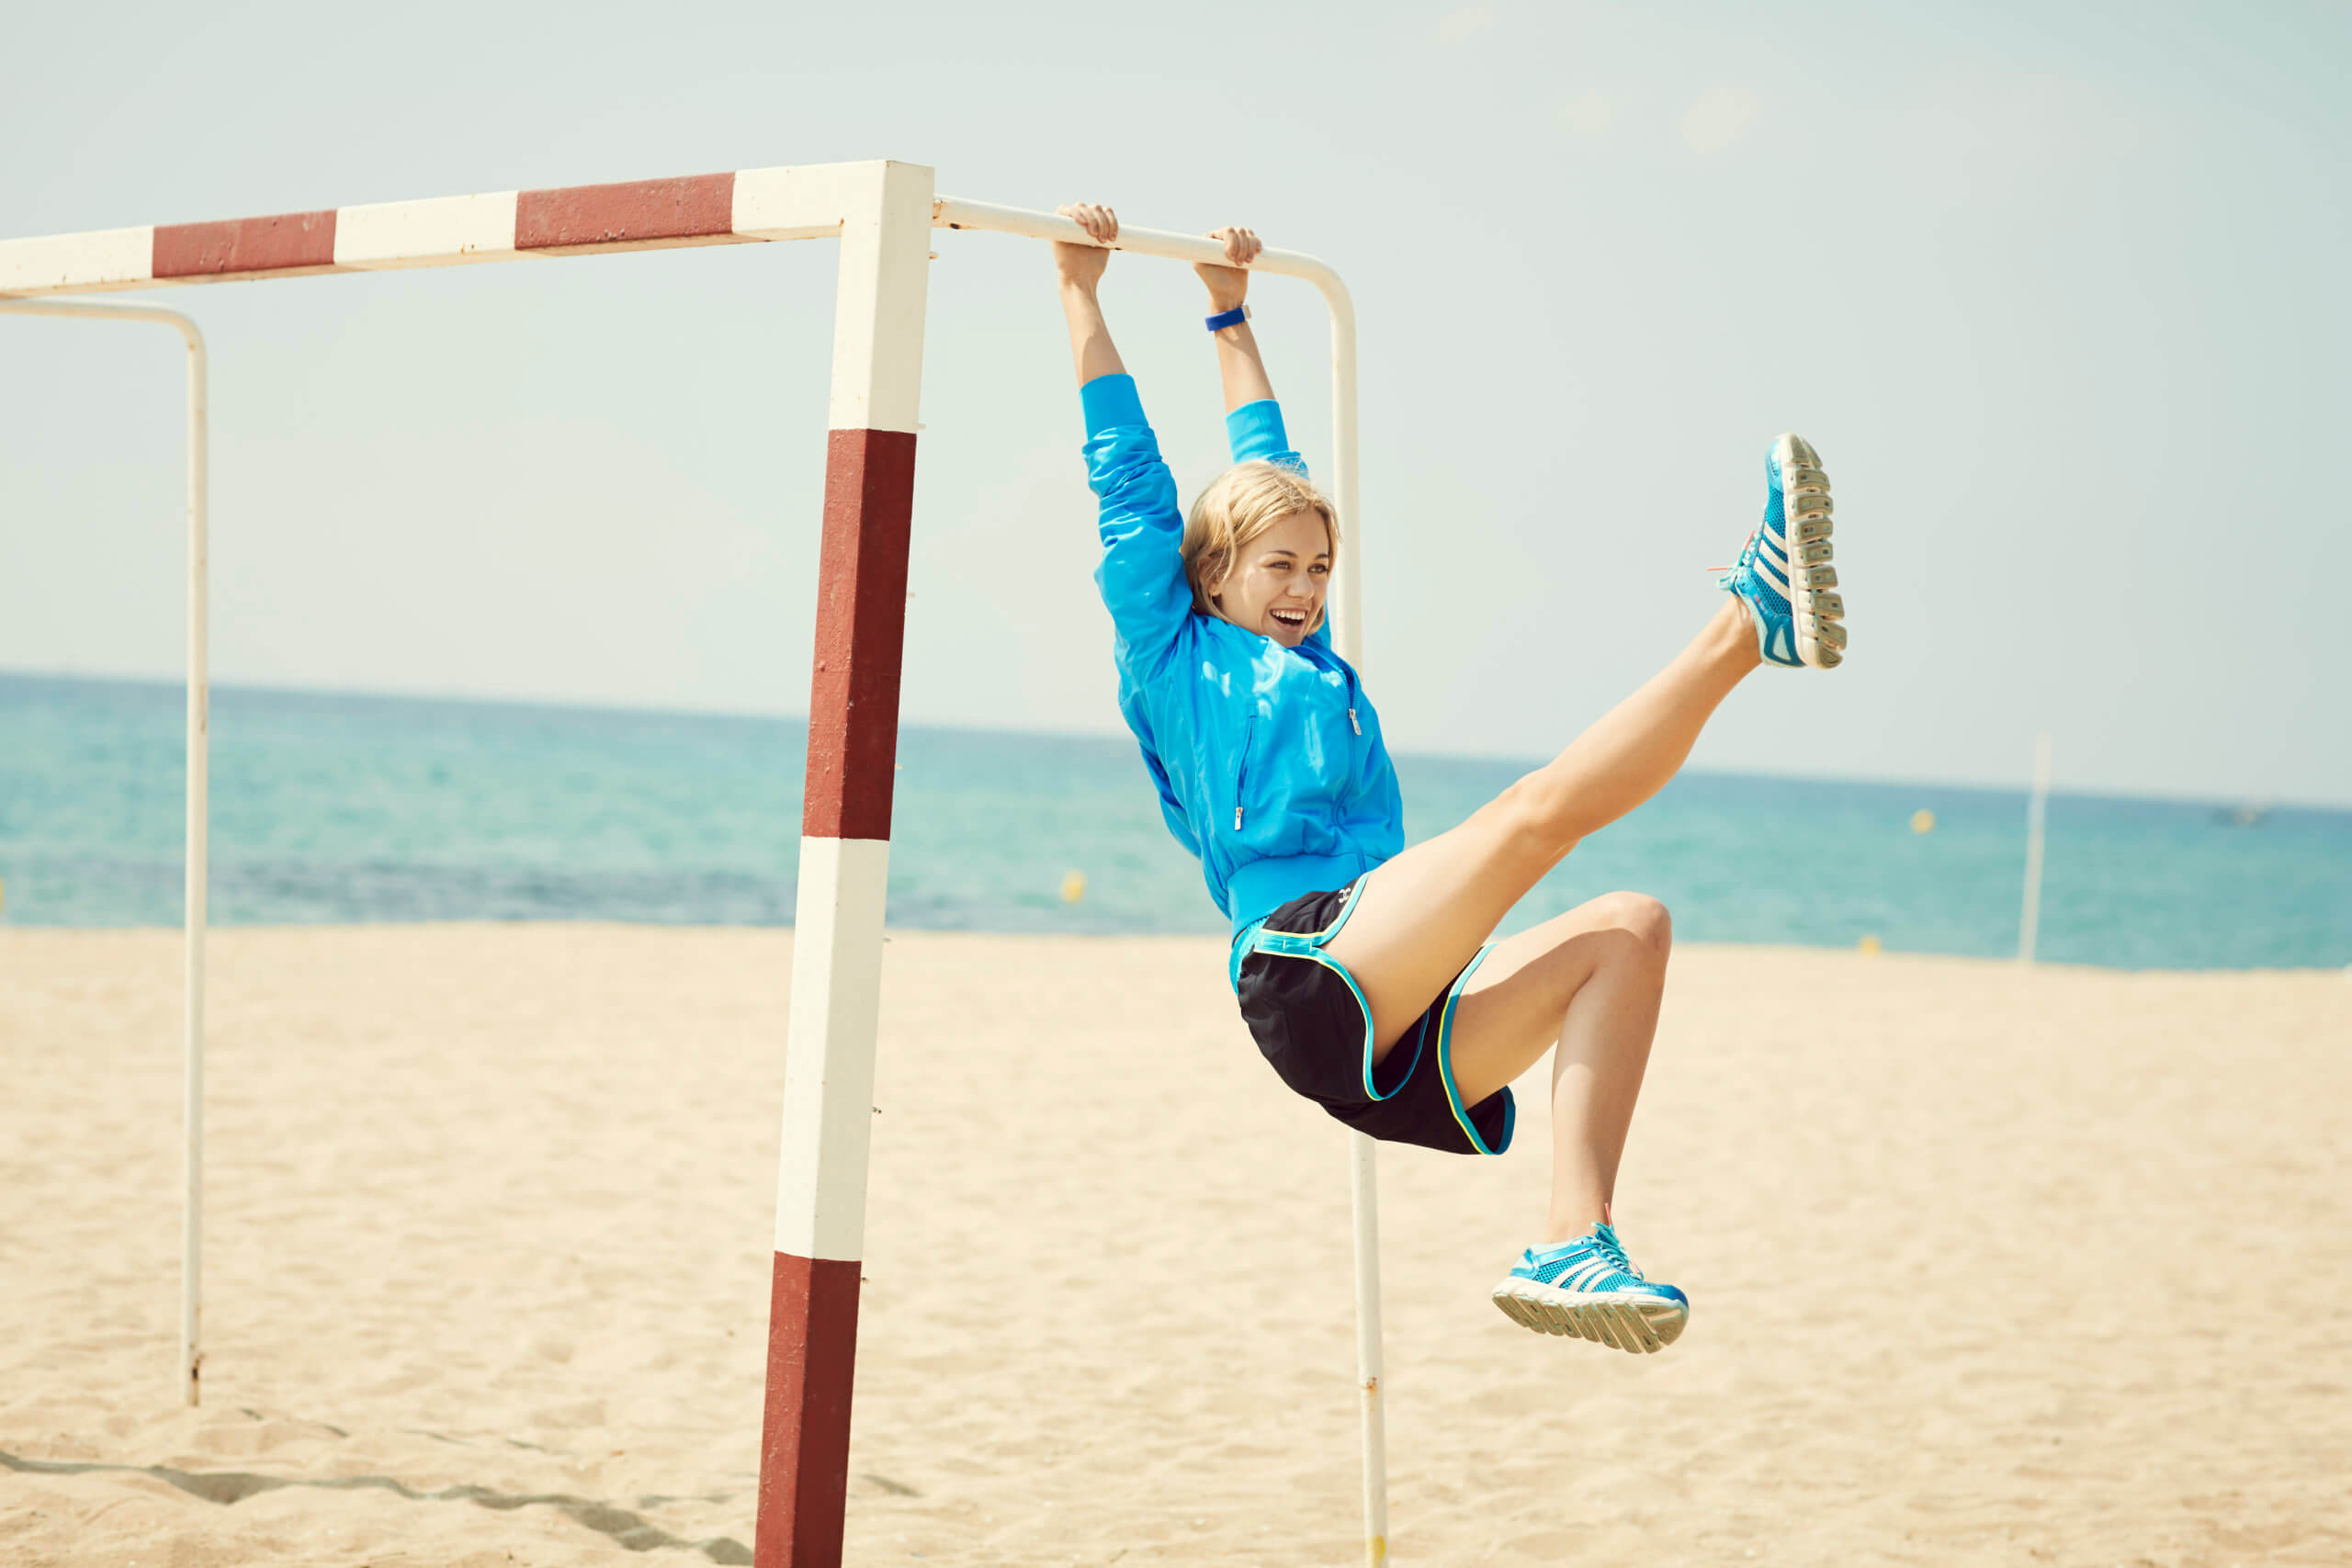 Blonde woman swinging on a bar at the beach.